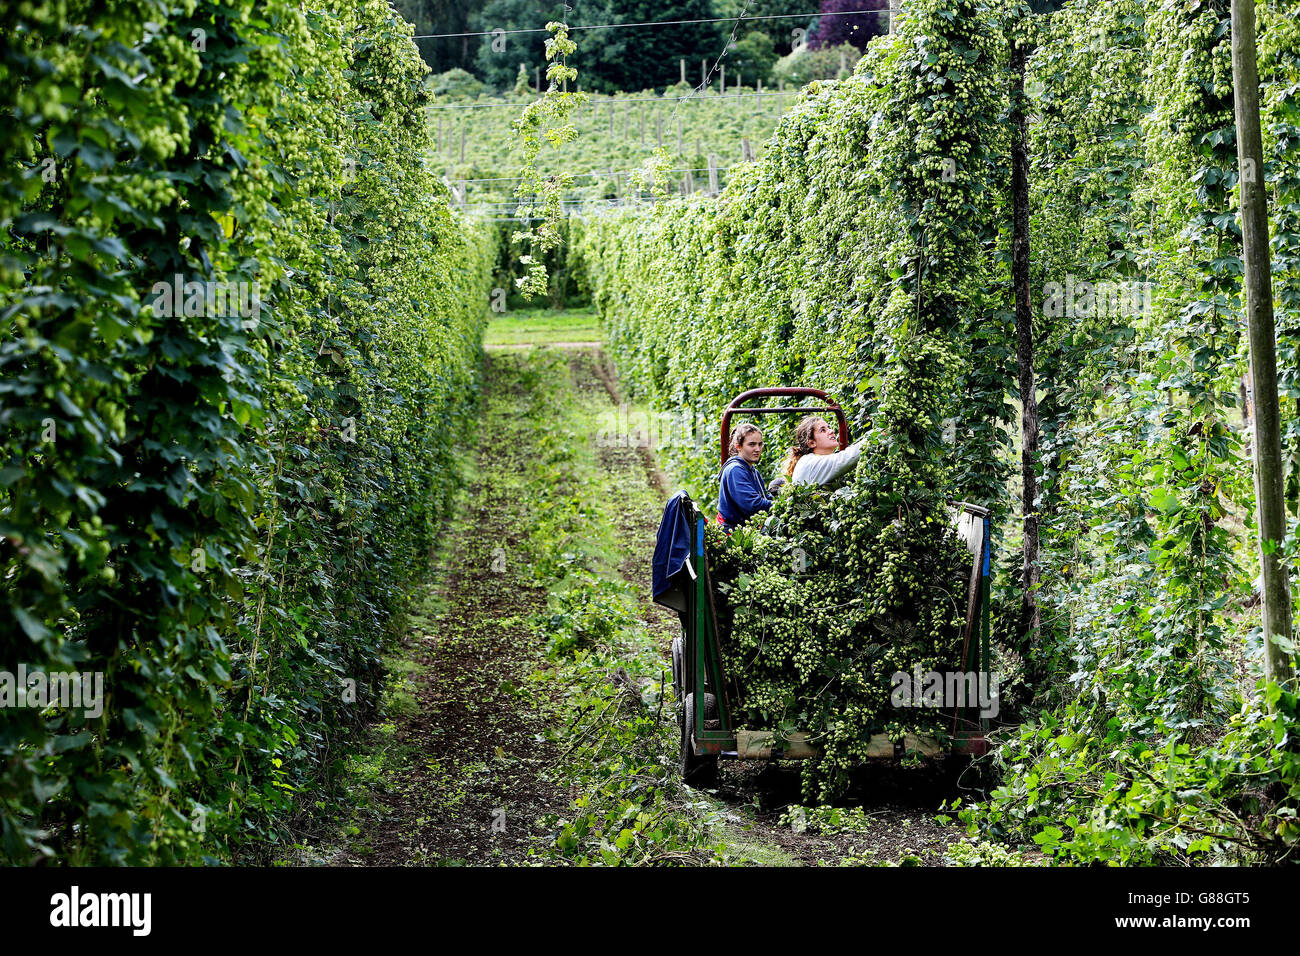 Staff at Hampton Estate Farms in Puttenham, Surrey pick Fuggles hops which are used for beer production by brewers throughout the country. Stock Photo